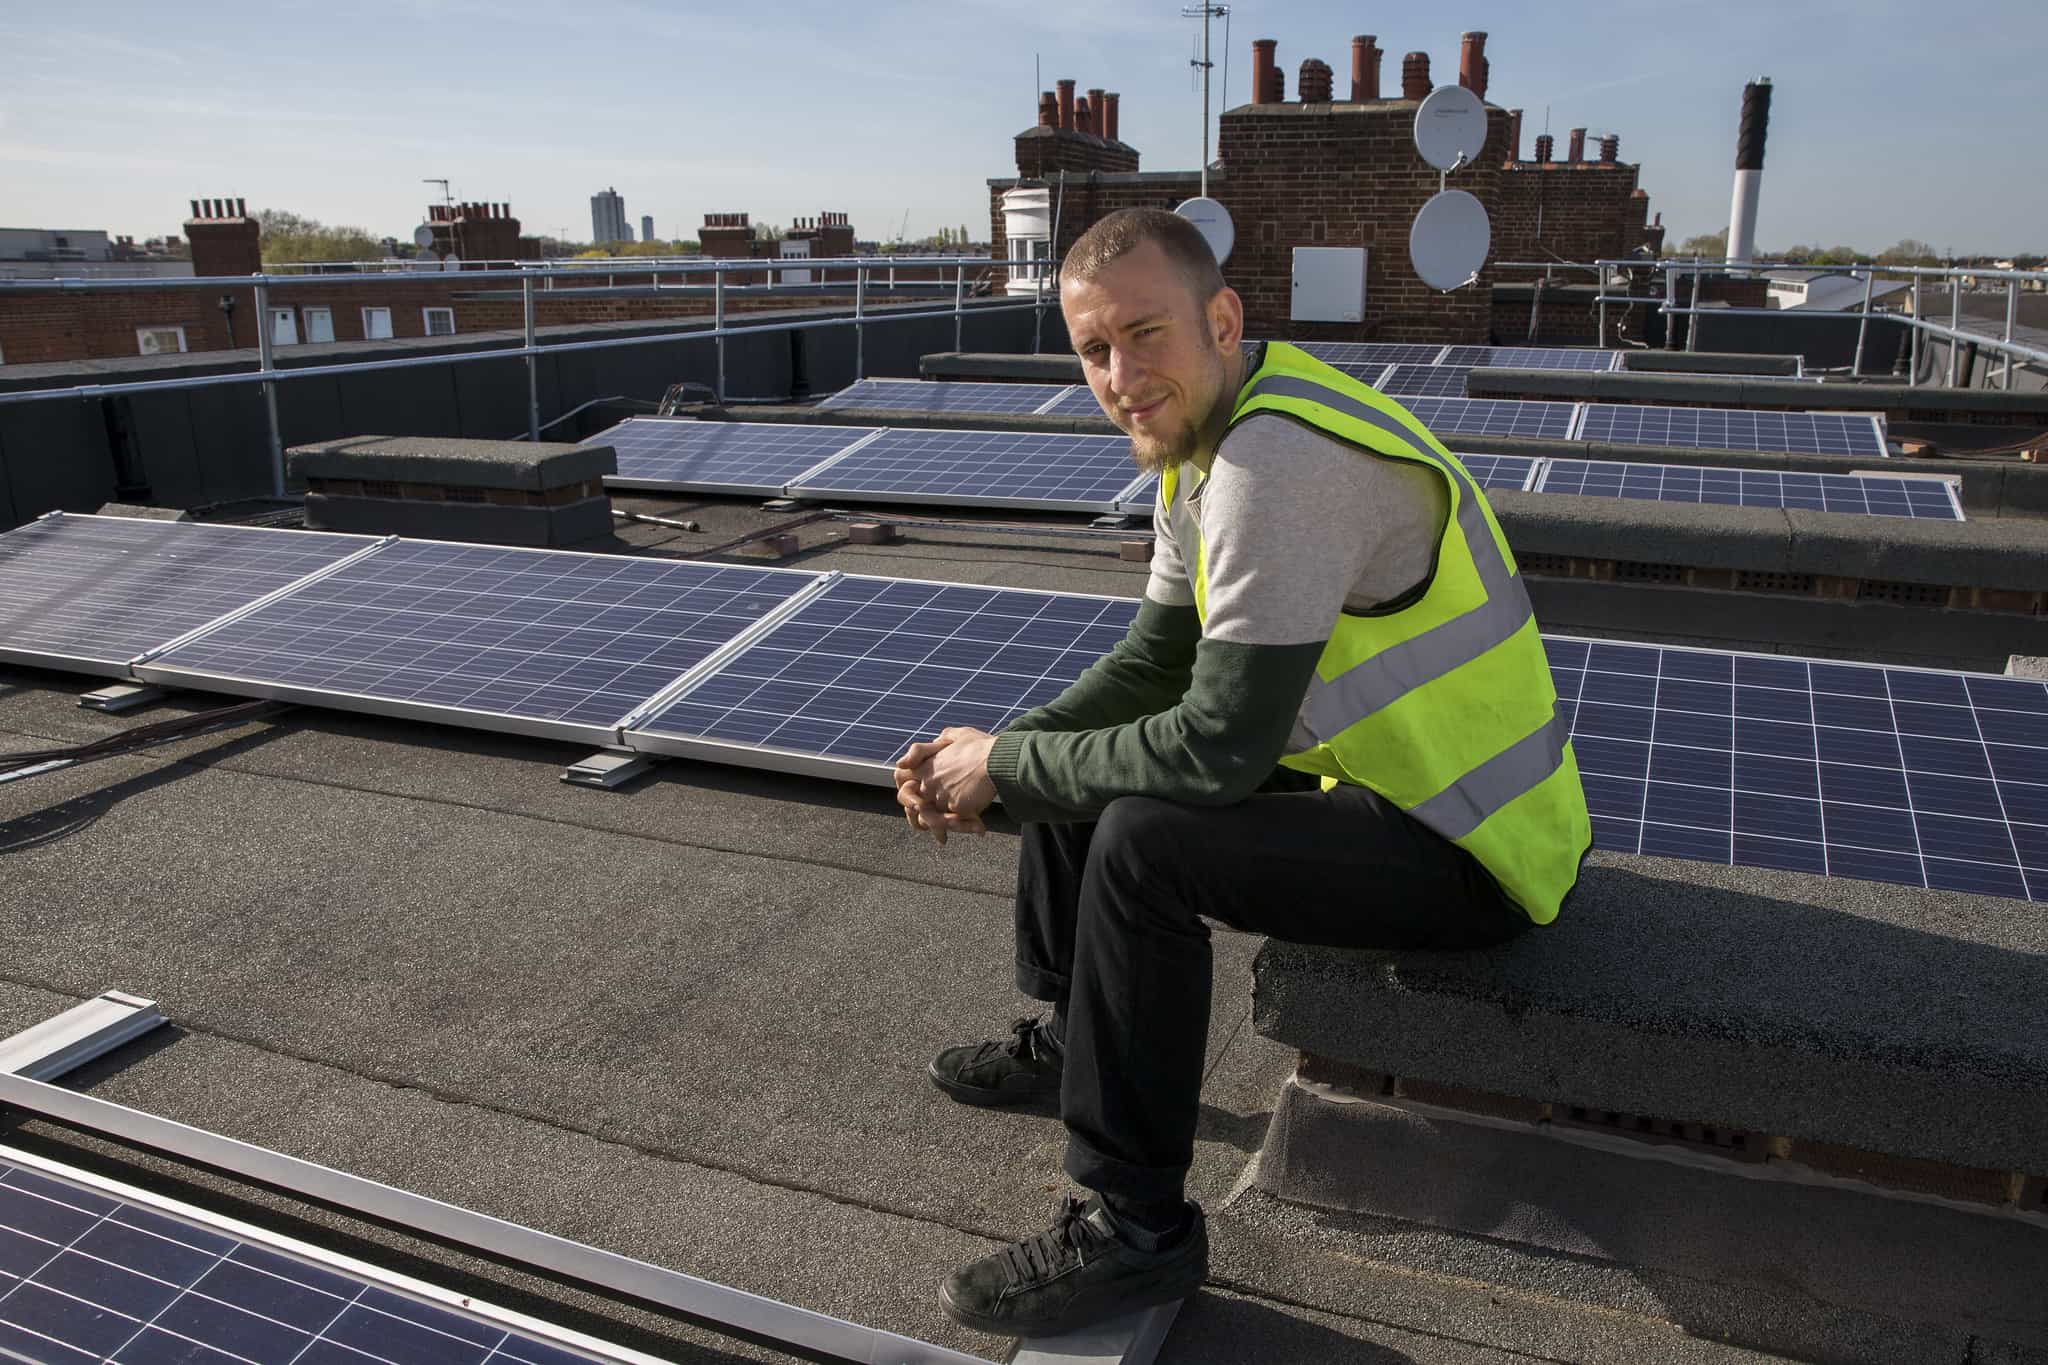 A man sitting in front of solar panels in London